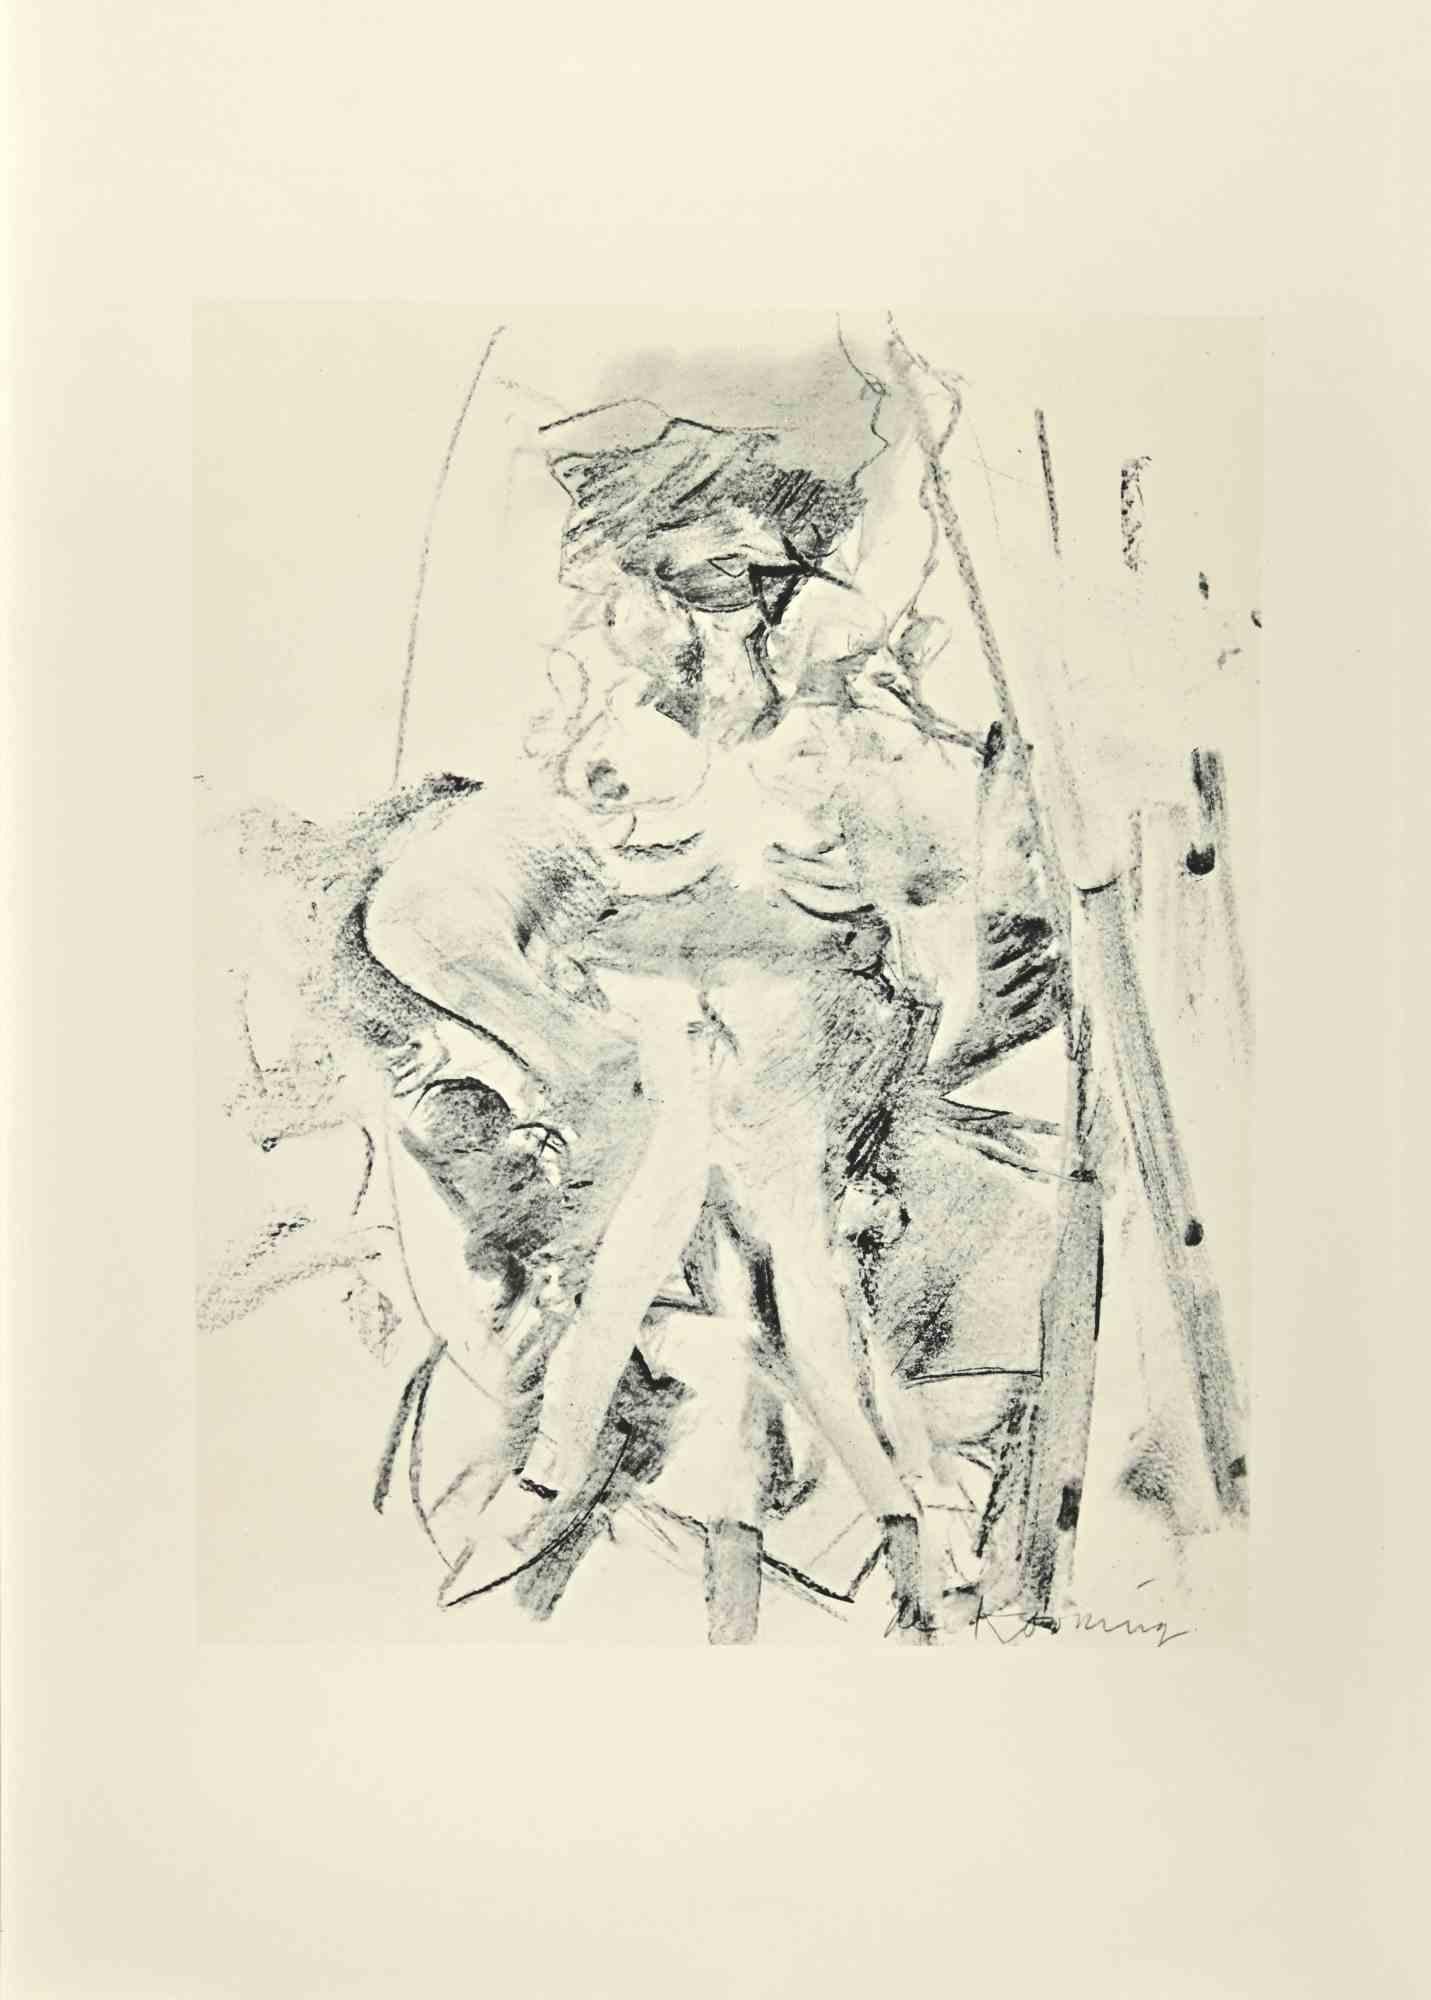 Willem de Kooning Print - Woman in a Rowing Boat - Offset and Lithograph after Willem De Kooning - 1985